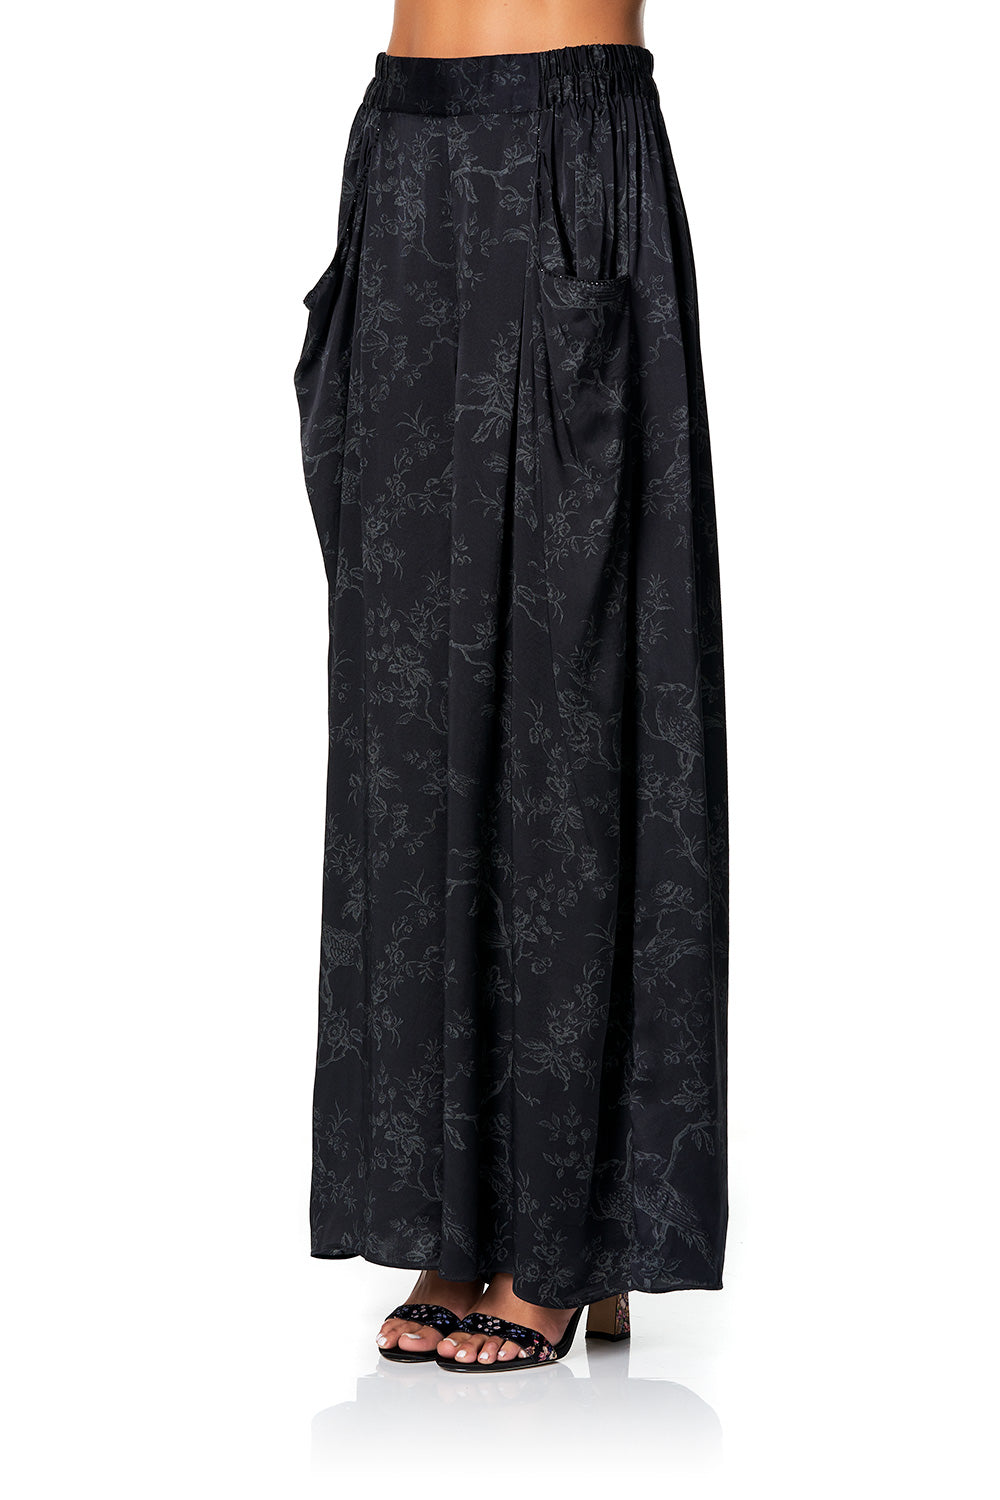 WIDE LEG PANT WITH GATHERED POCKETS NOIR BOUDOIR